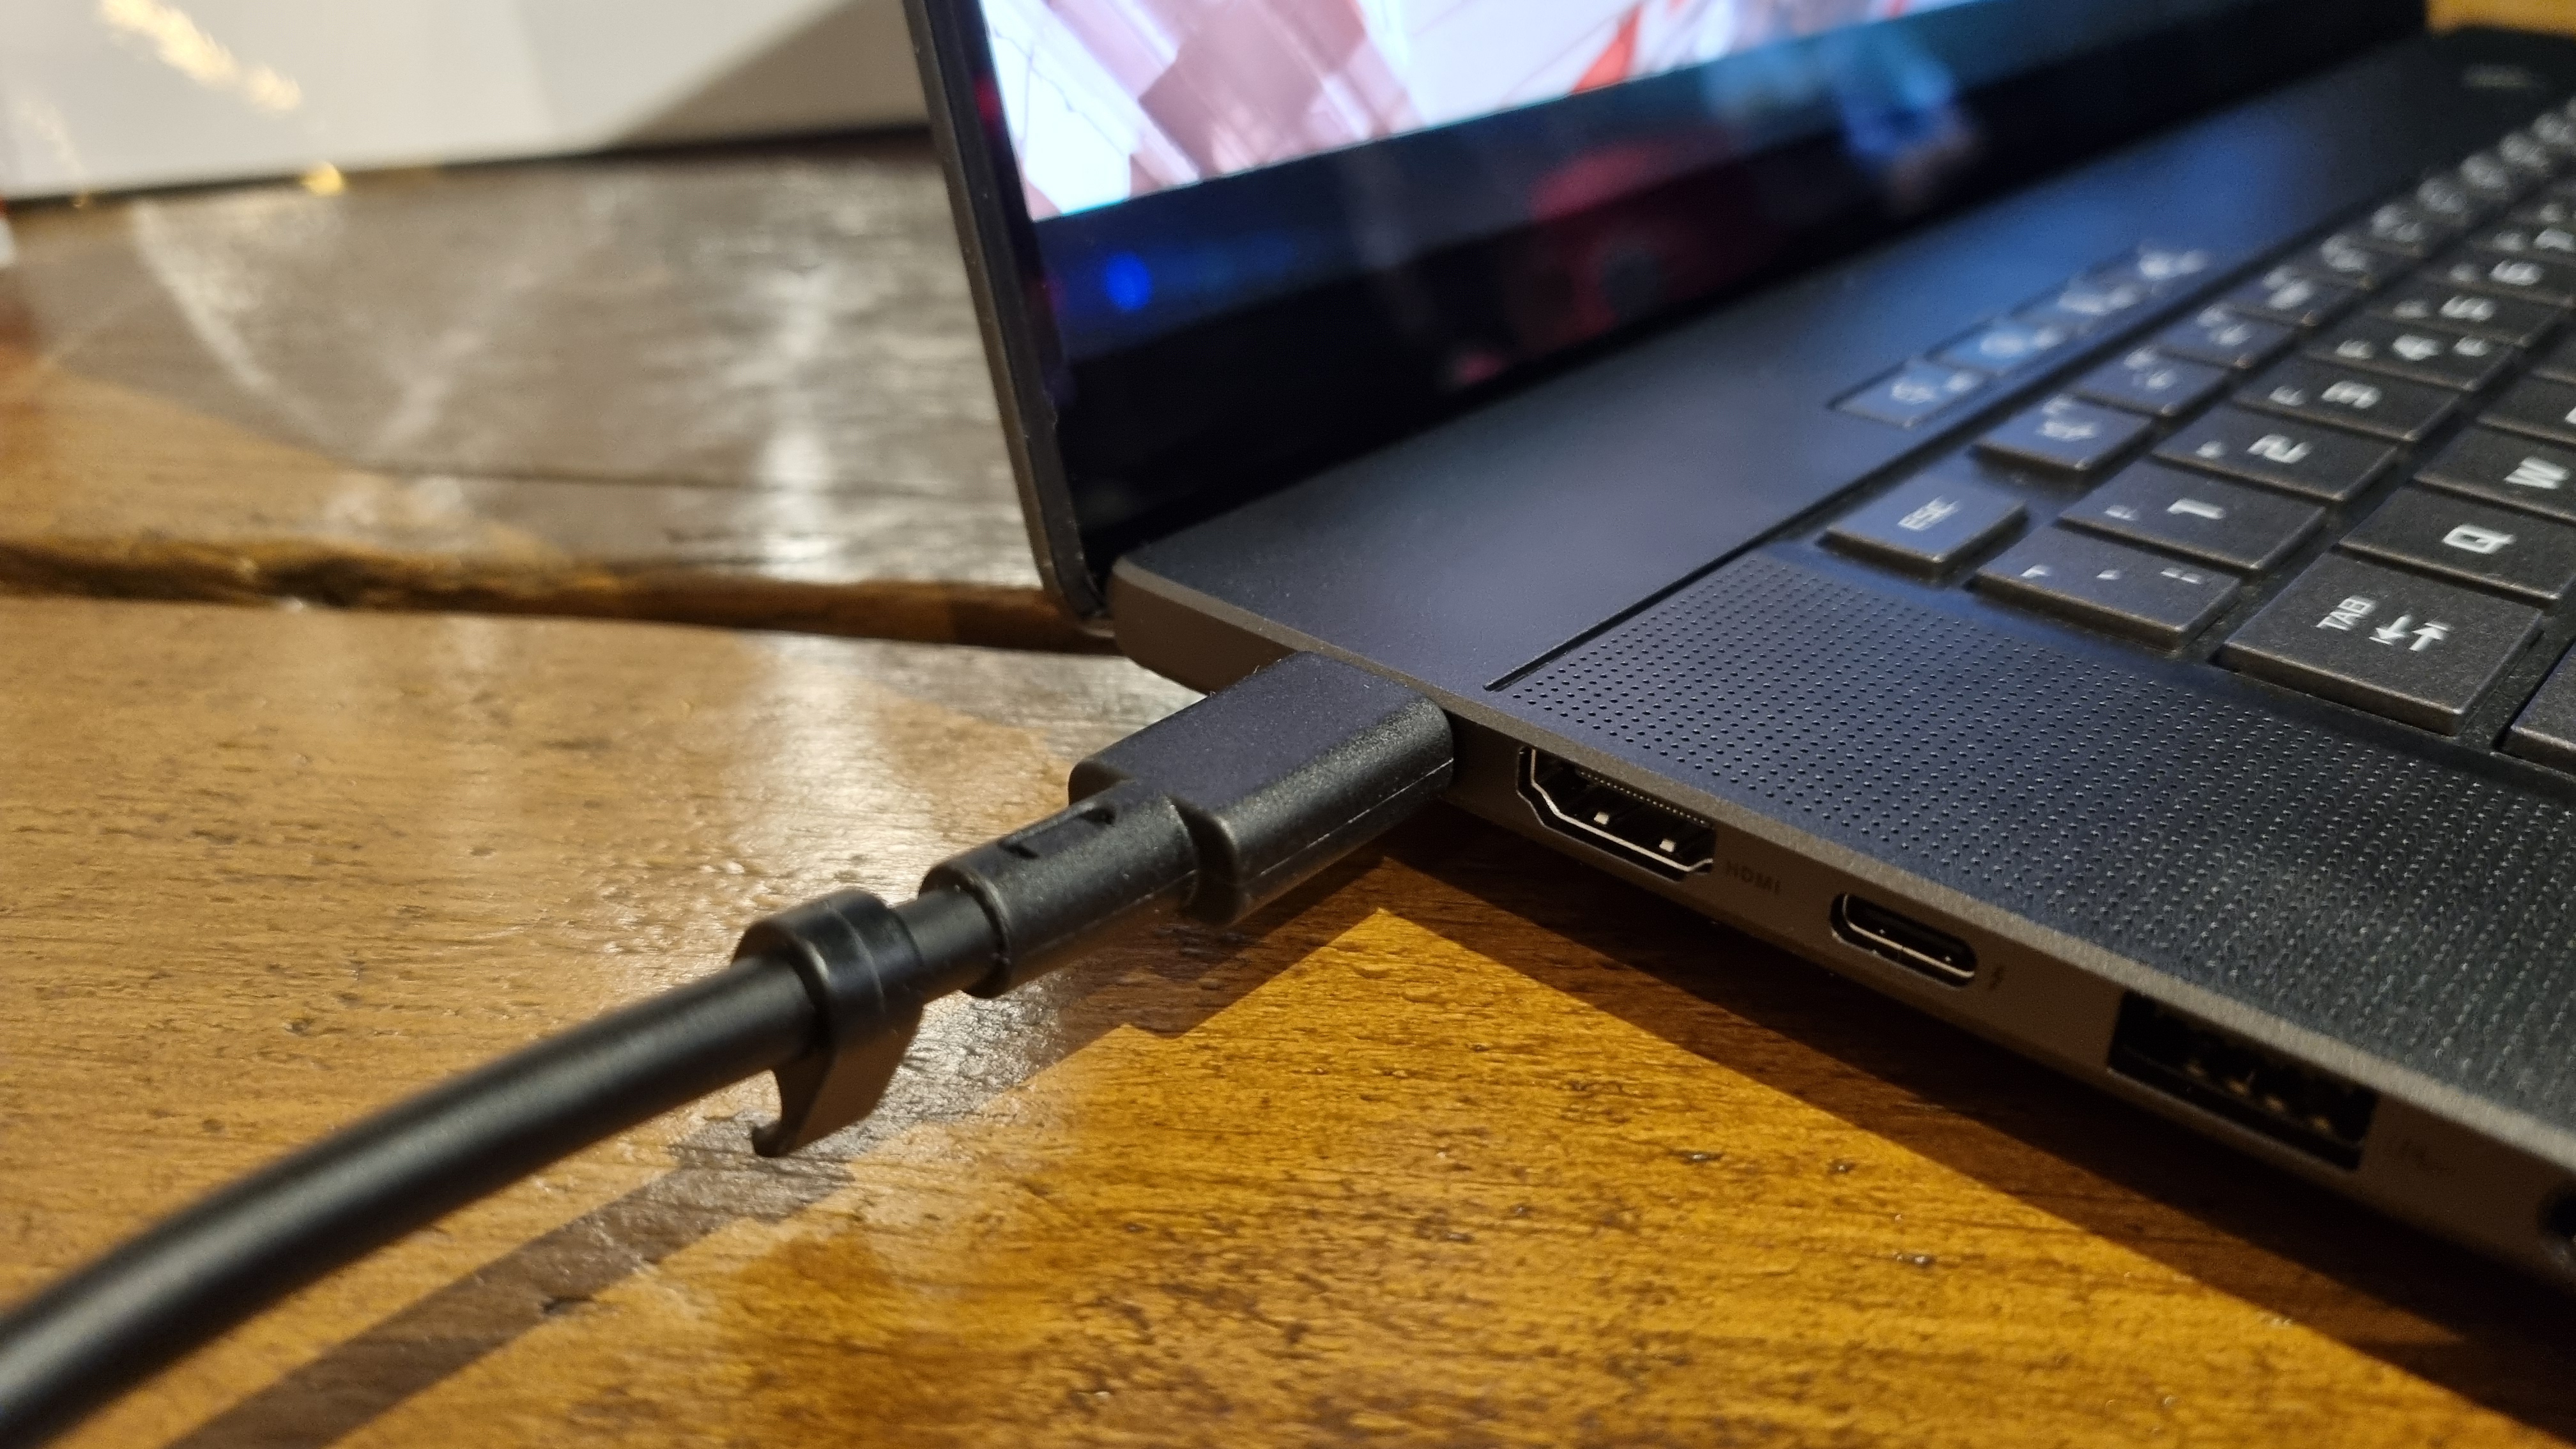  Got a laptop plugged in 24/7? You could be ruining your battery life, so prepare to do the charger dance 